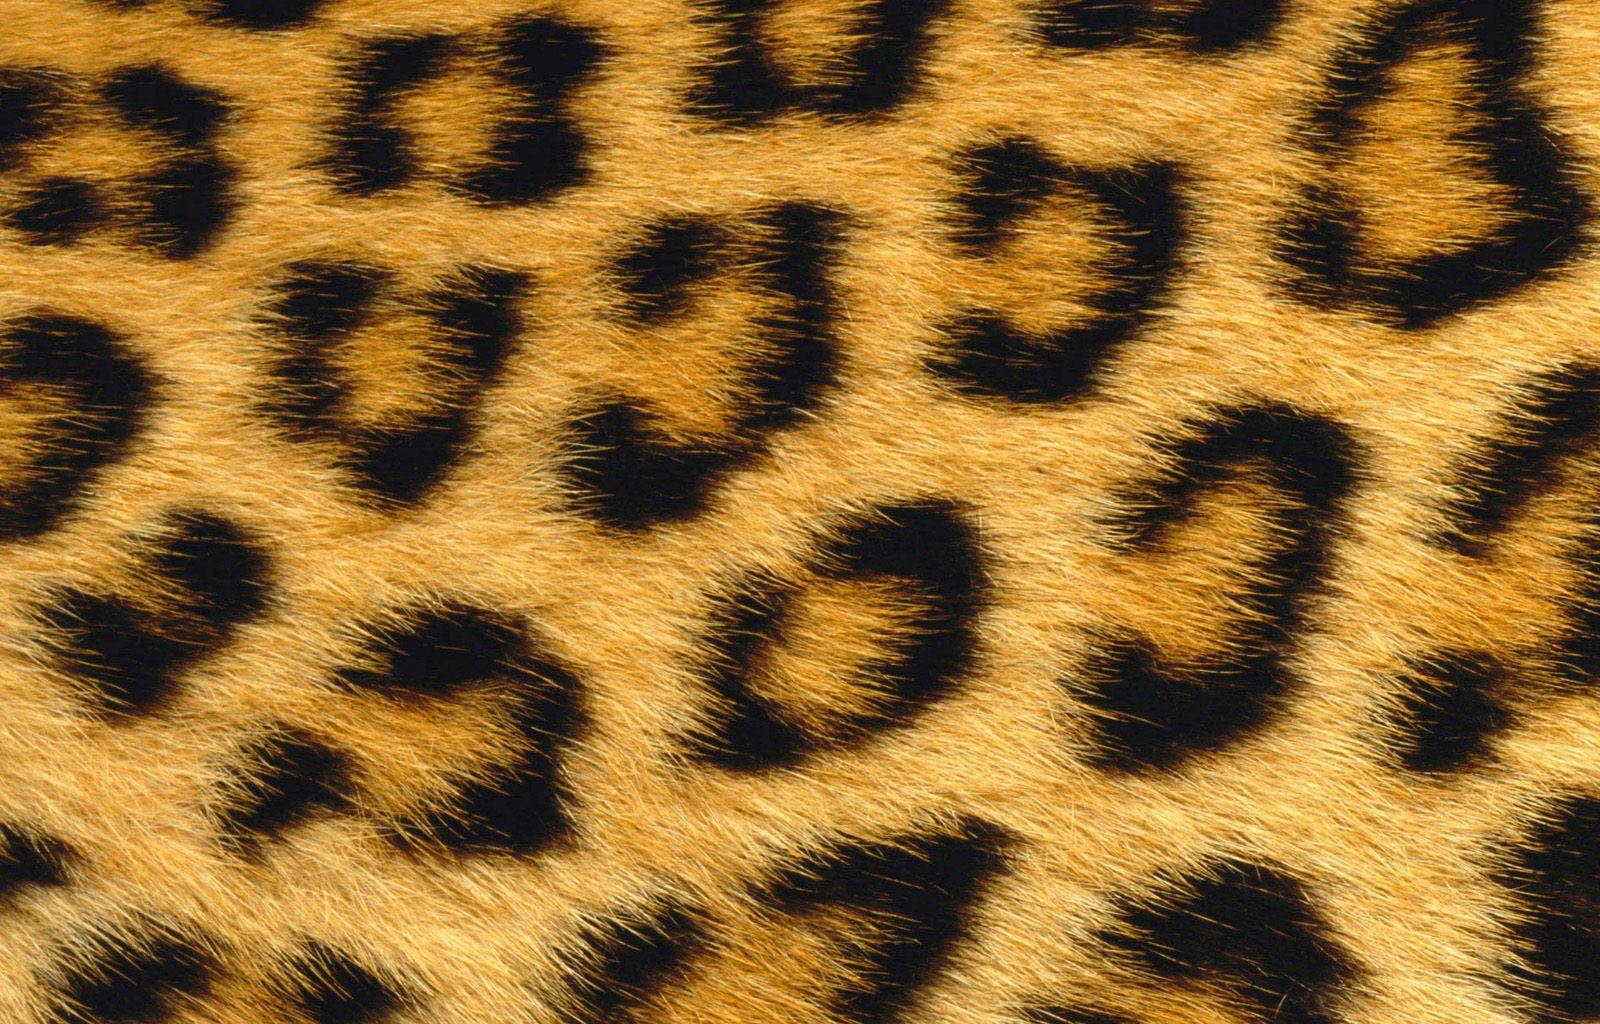 Download Abstract Cool Desktop Picture Leopard Wallpaper. Full